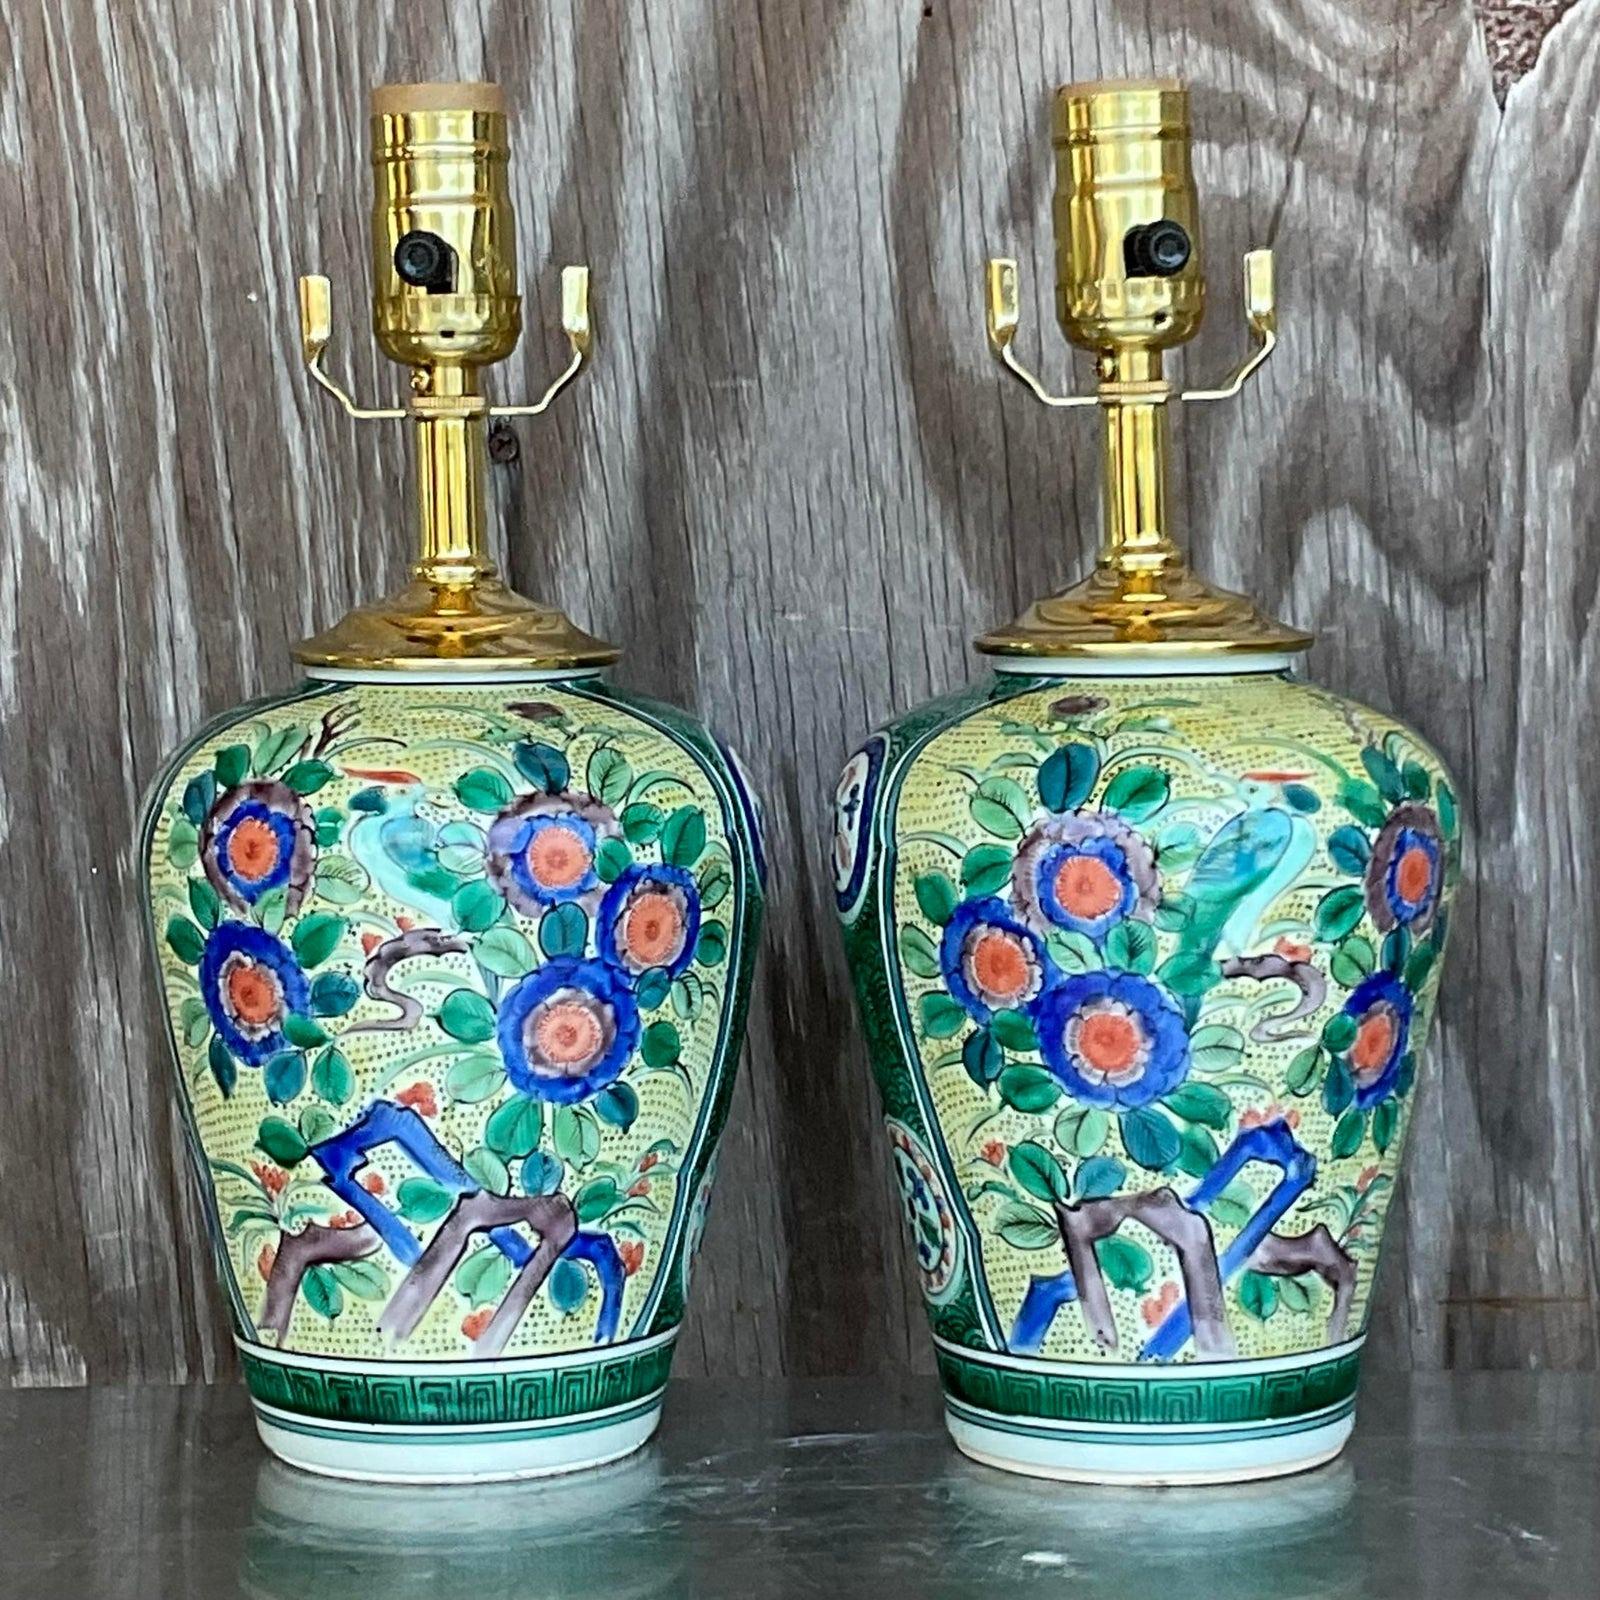 North American Vintage Asian Glazed Ceramic Floral Table Lamps - a Pair For Sale